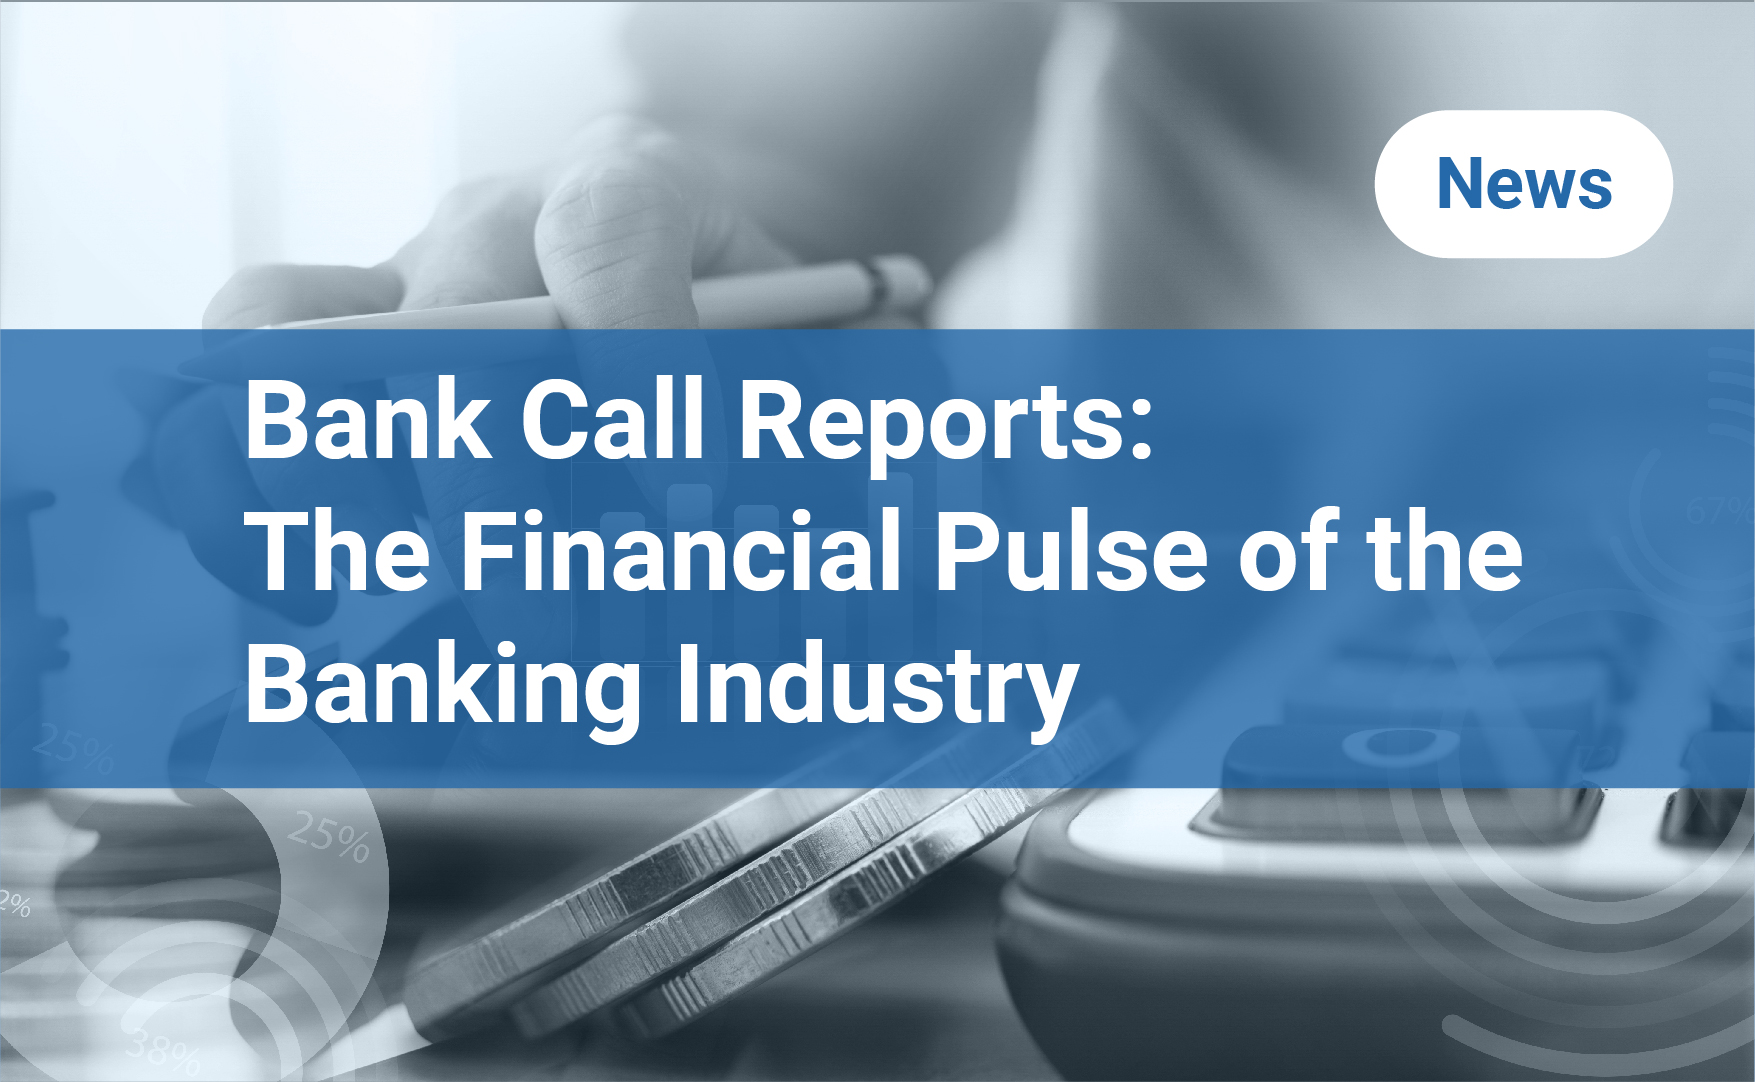 Bank Call Reports: The Financial Pulse of the Banking Industry